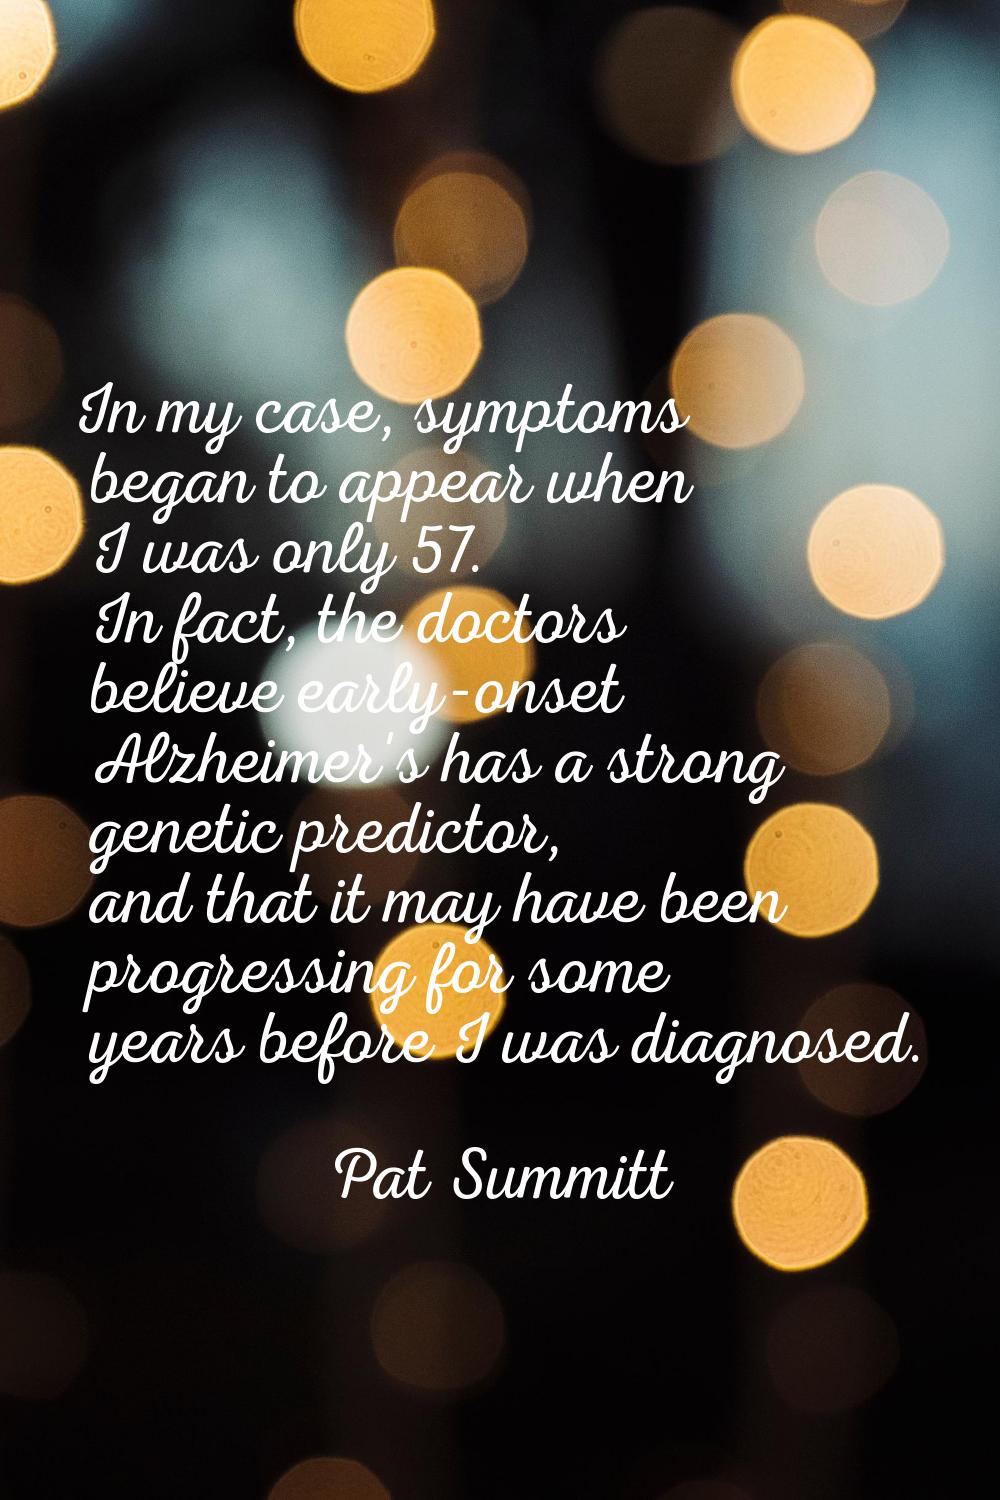 In my case, symptoms began to appear when I was only 57. In fact, the doctors believe early-onset A